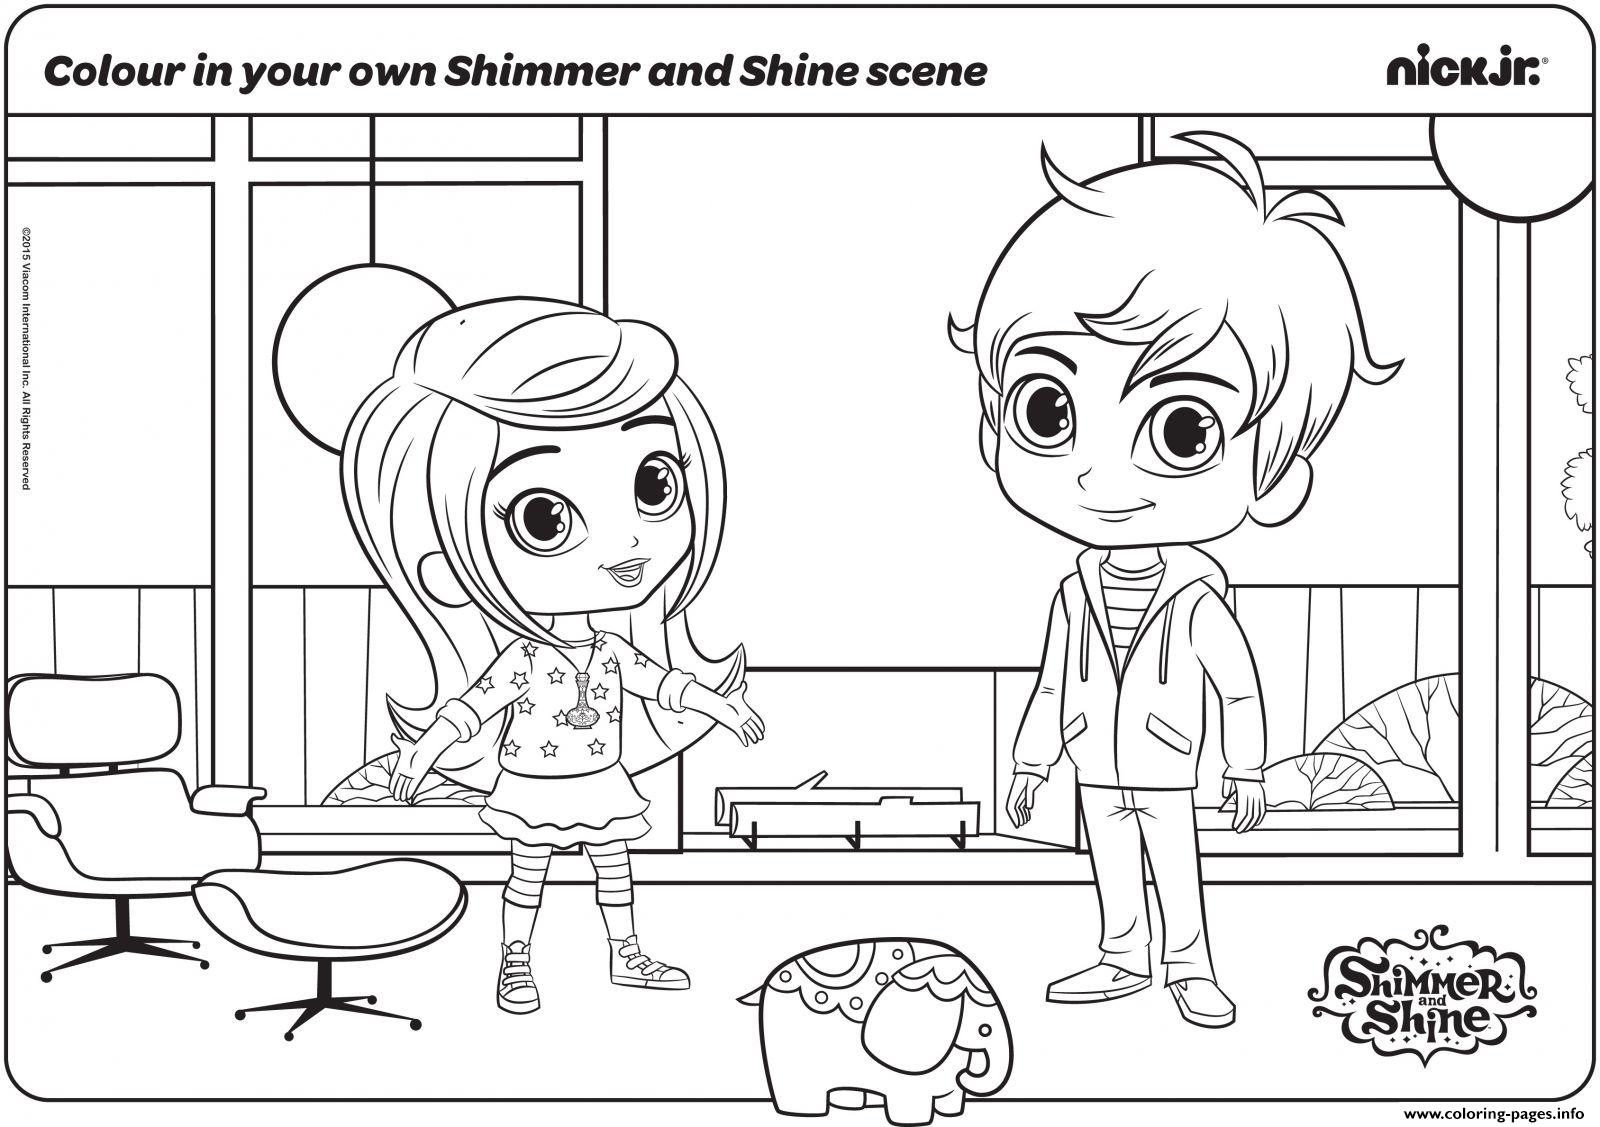 Colour in your own Shimmer and Shine Scene coloring pages